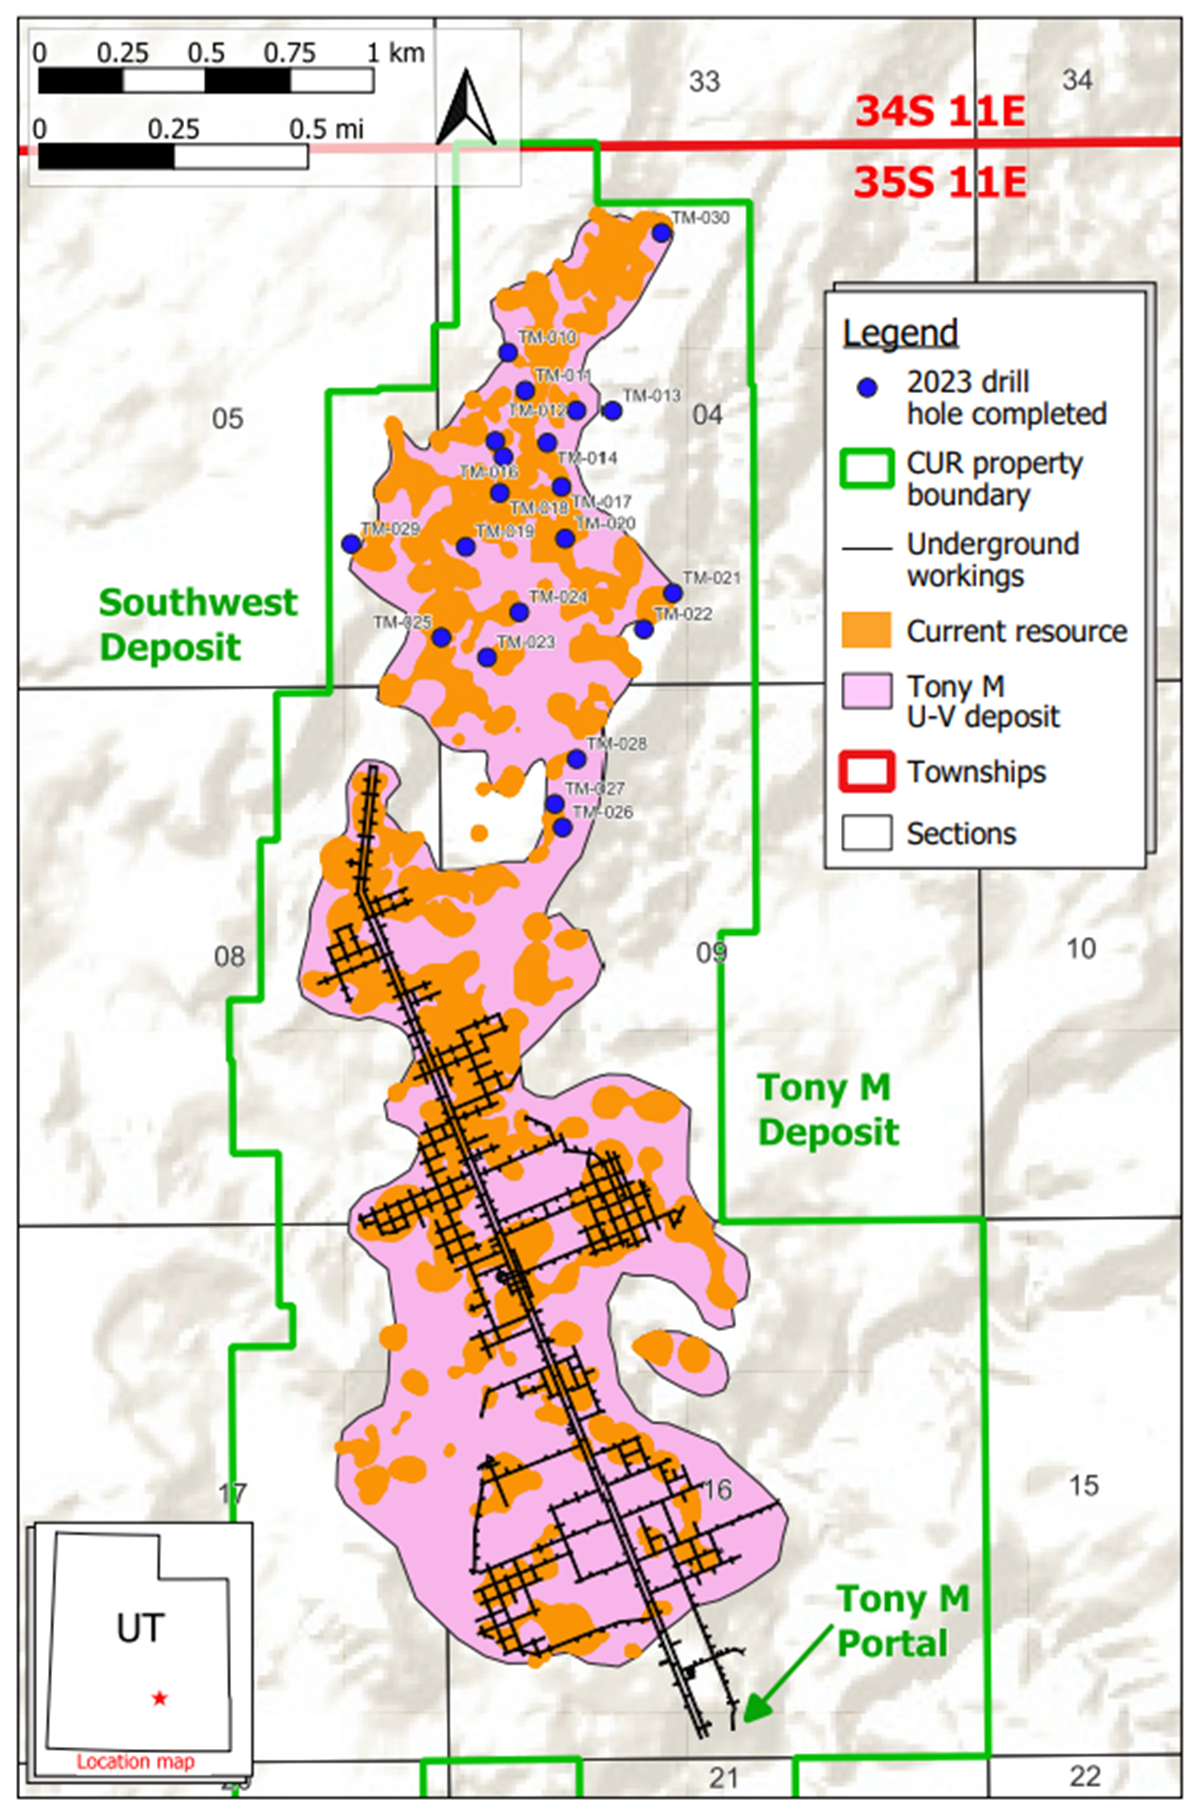 Plan view map of the Tony M Mine with 2023 drill holes